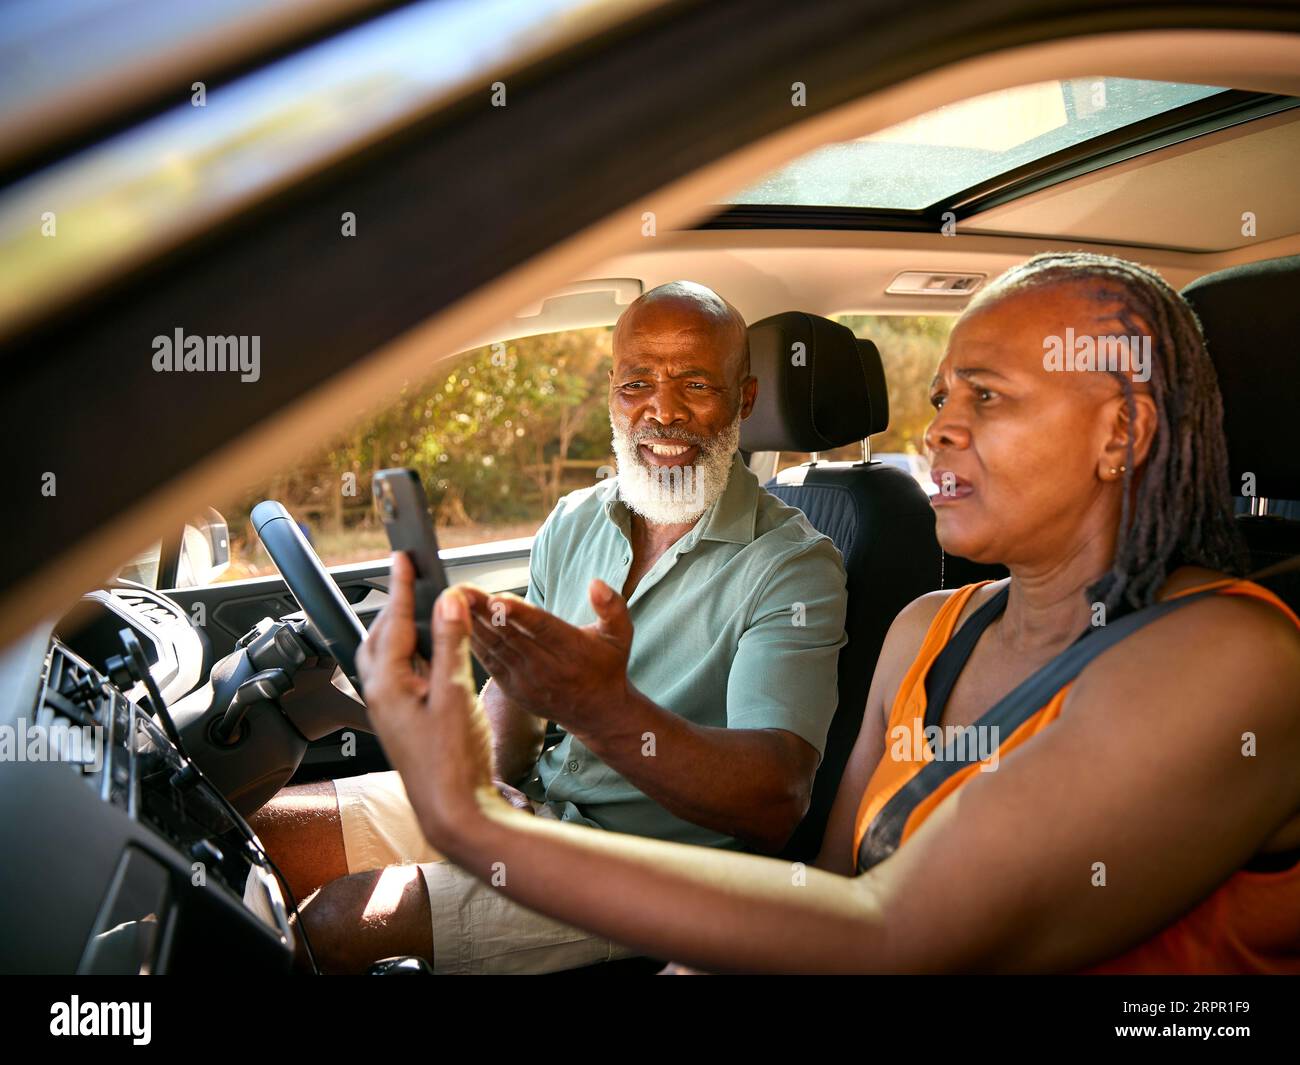 Senior Couple In Car Arguing About Directions On GPS Sat Nav On Mobile Phone On Day Trip Out Stock Photo